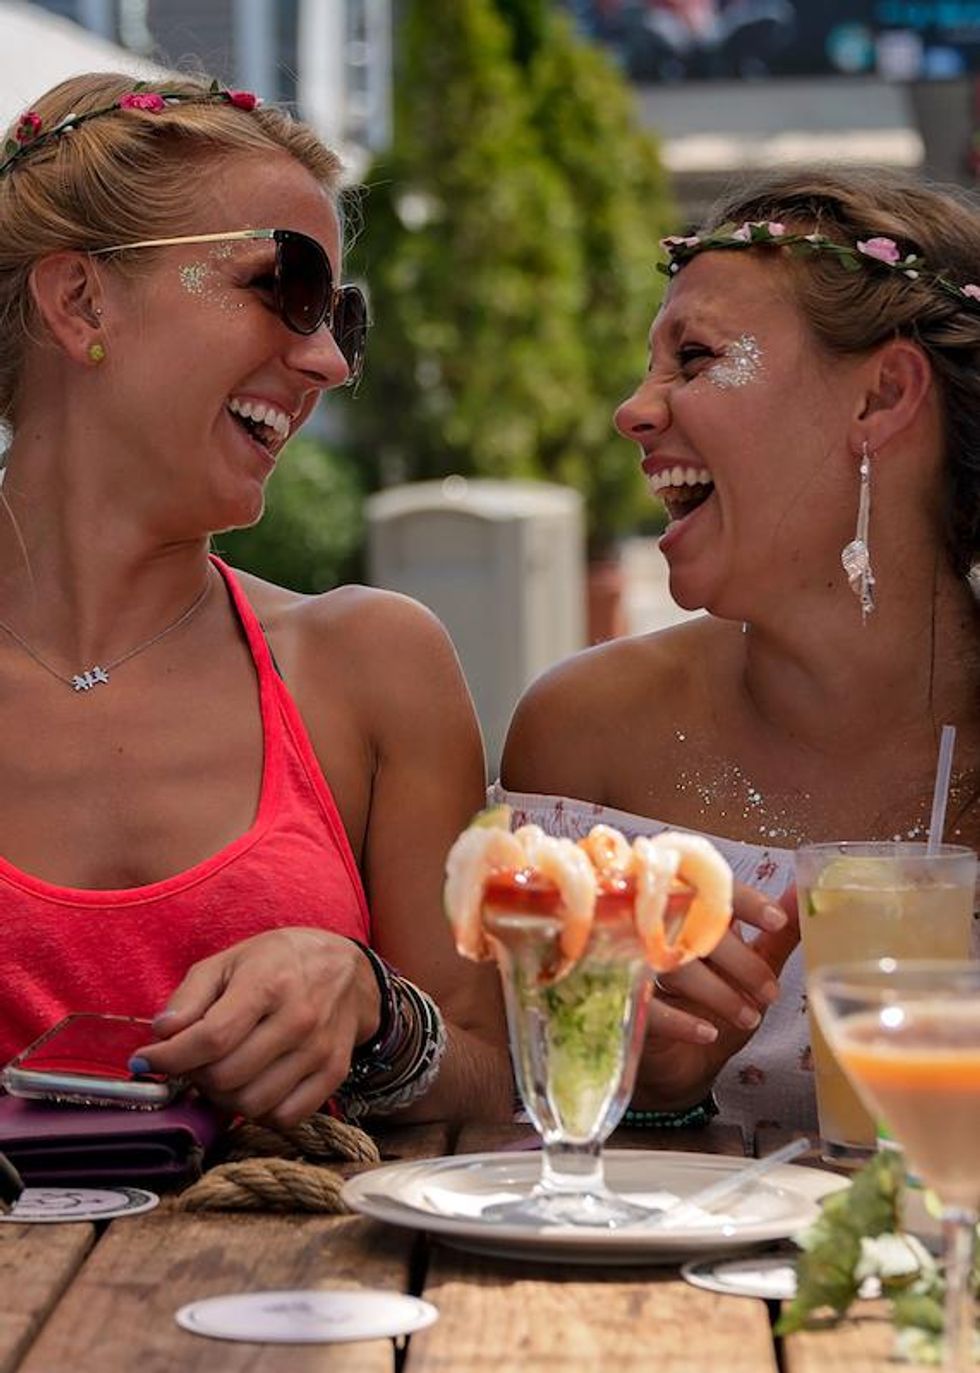 Queer couple laughing over shrimp cocktails on an outdoor dining patio